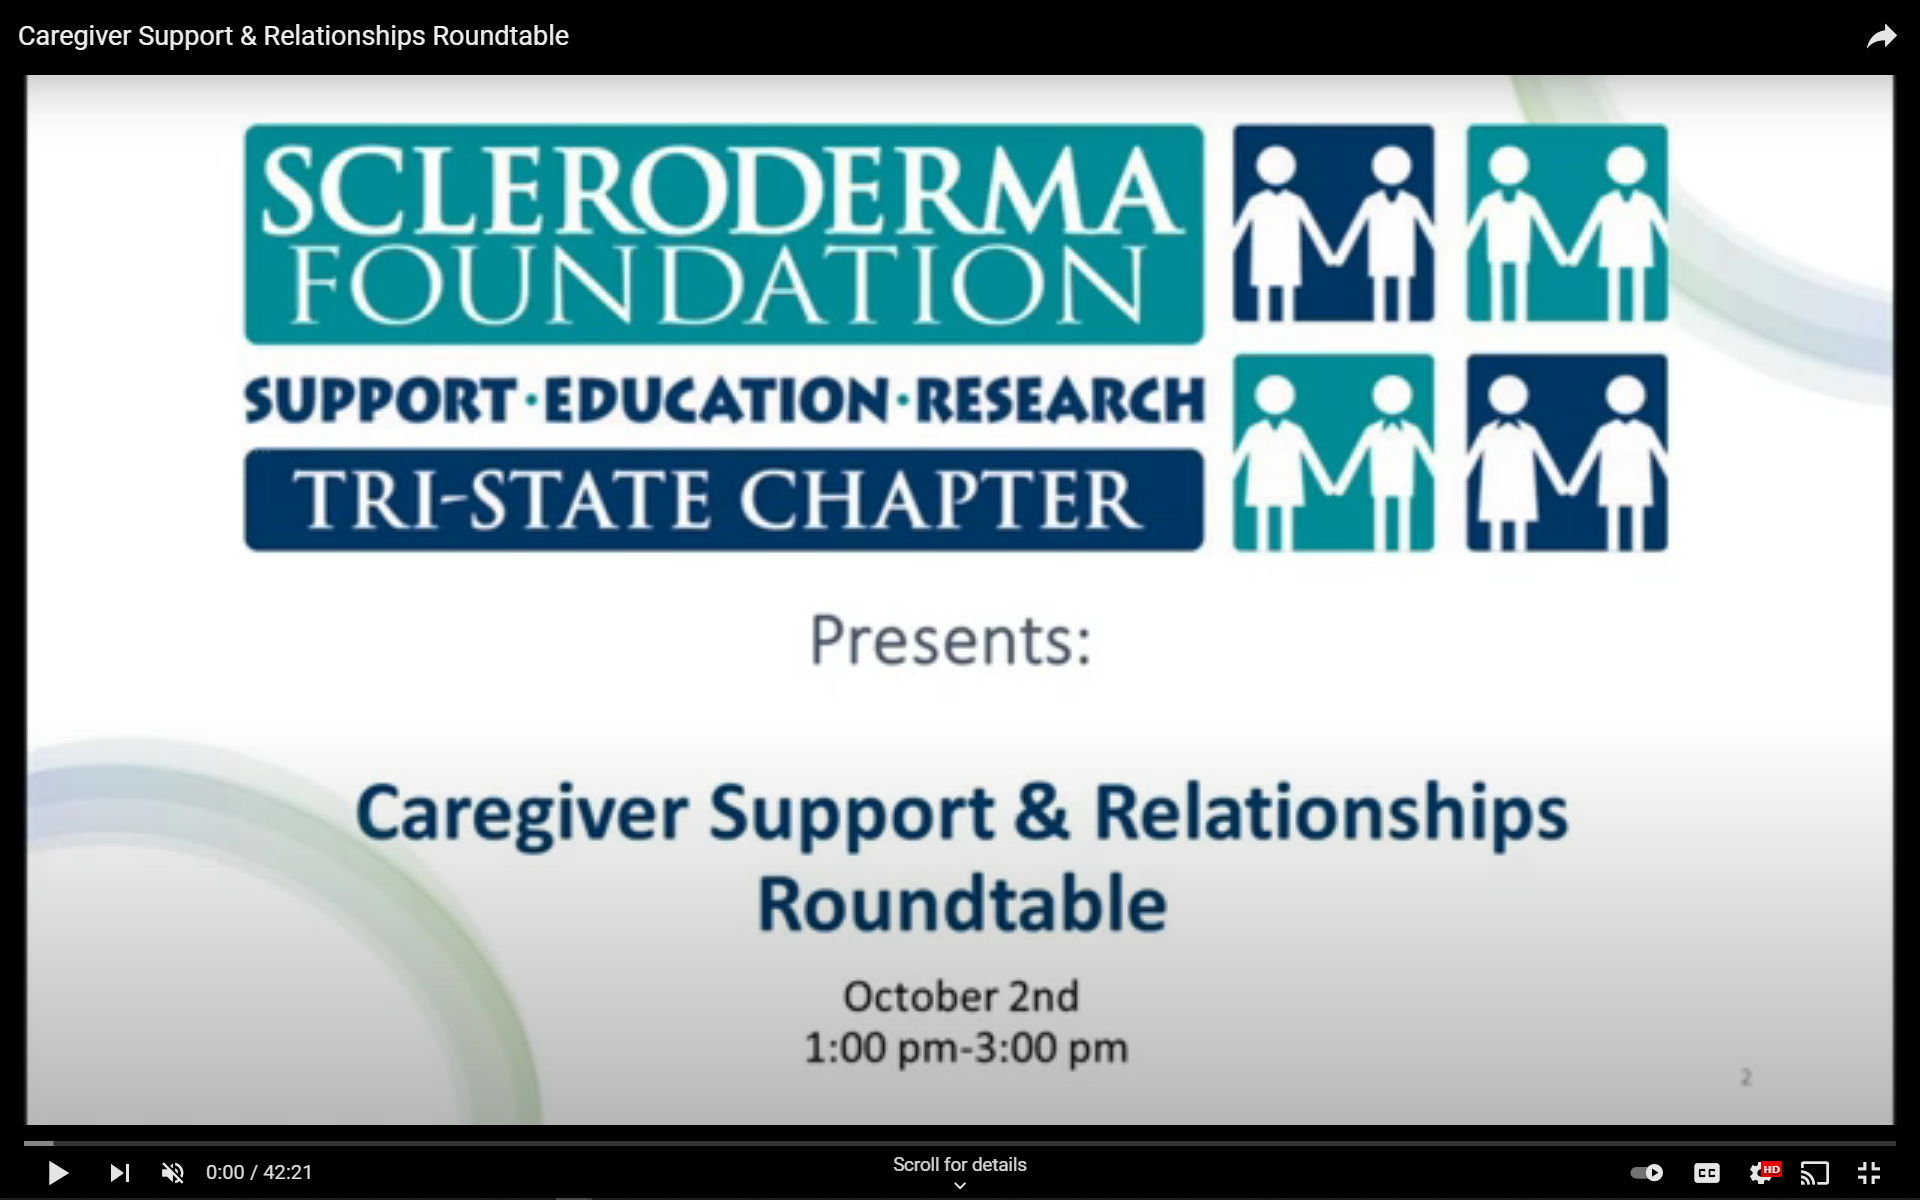 Tri-state Caregiver Support Roundtable 2021